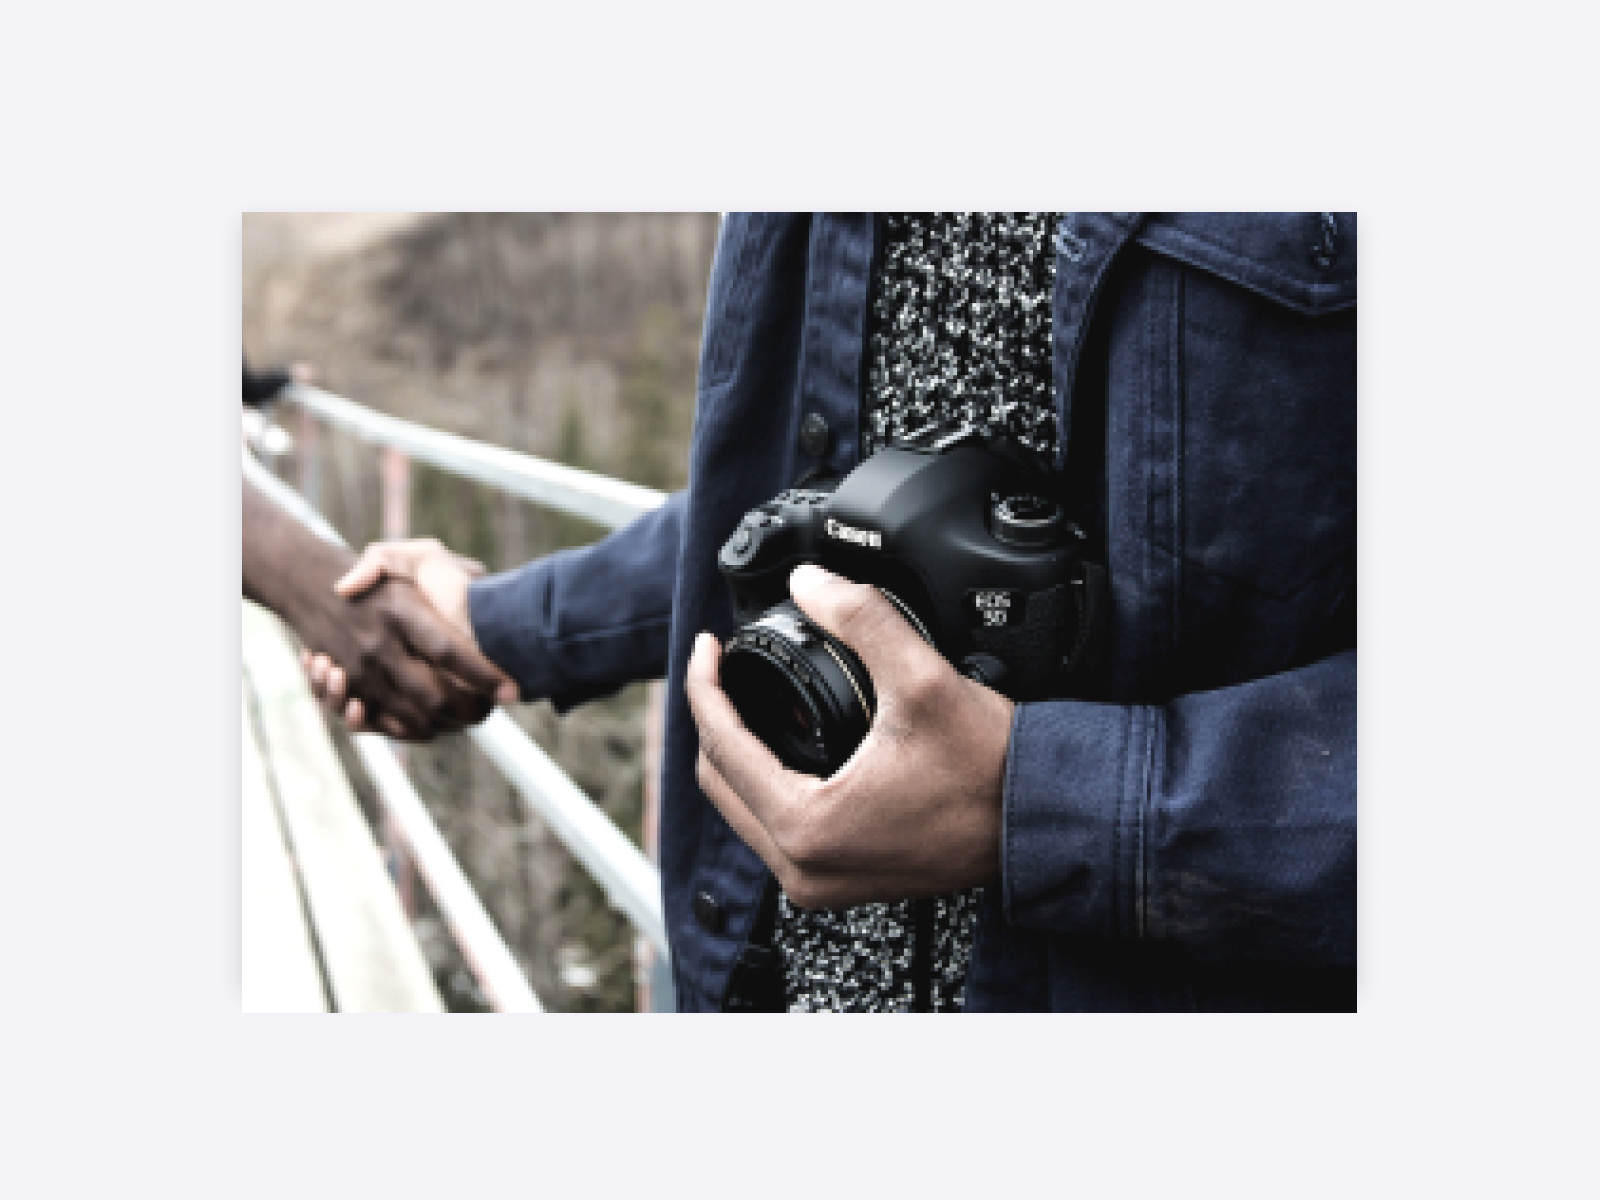 A person with a camera shaking hands with another person.